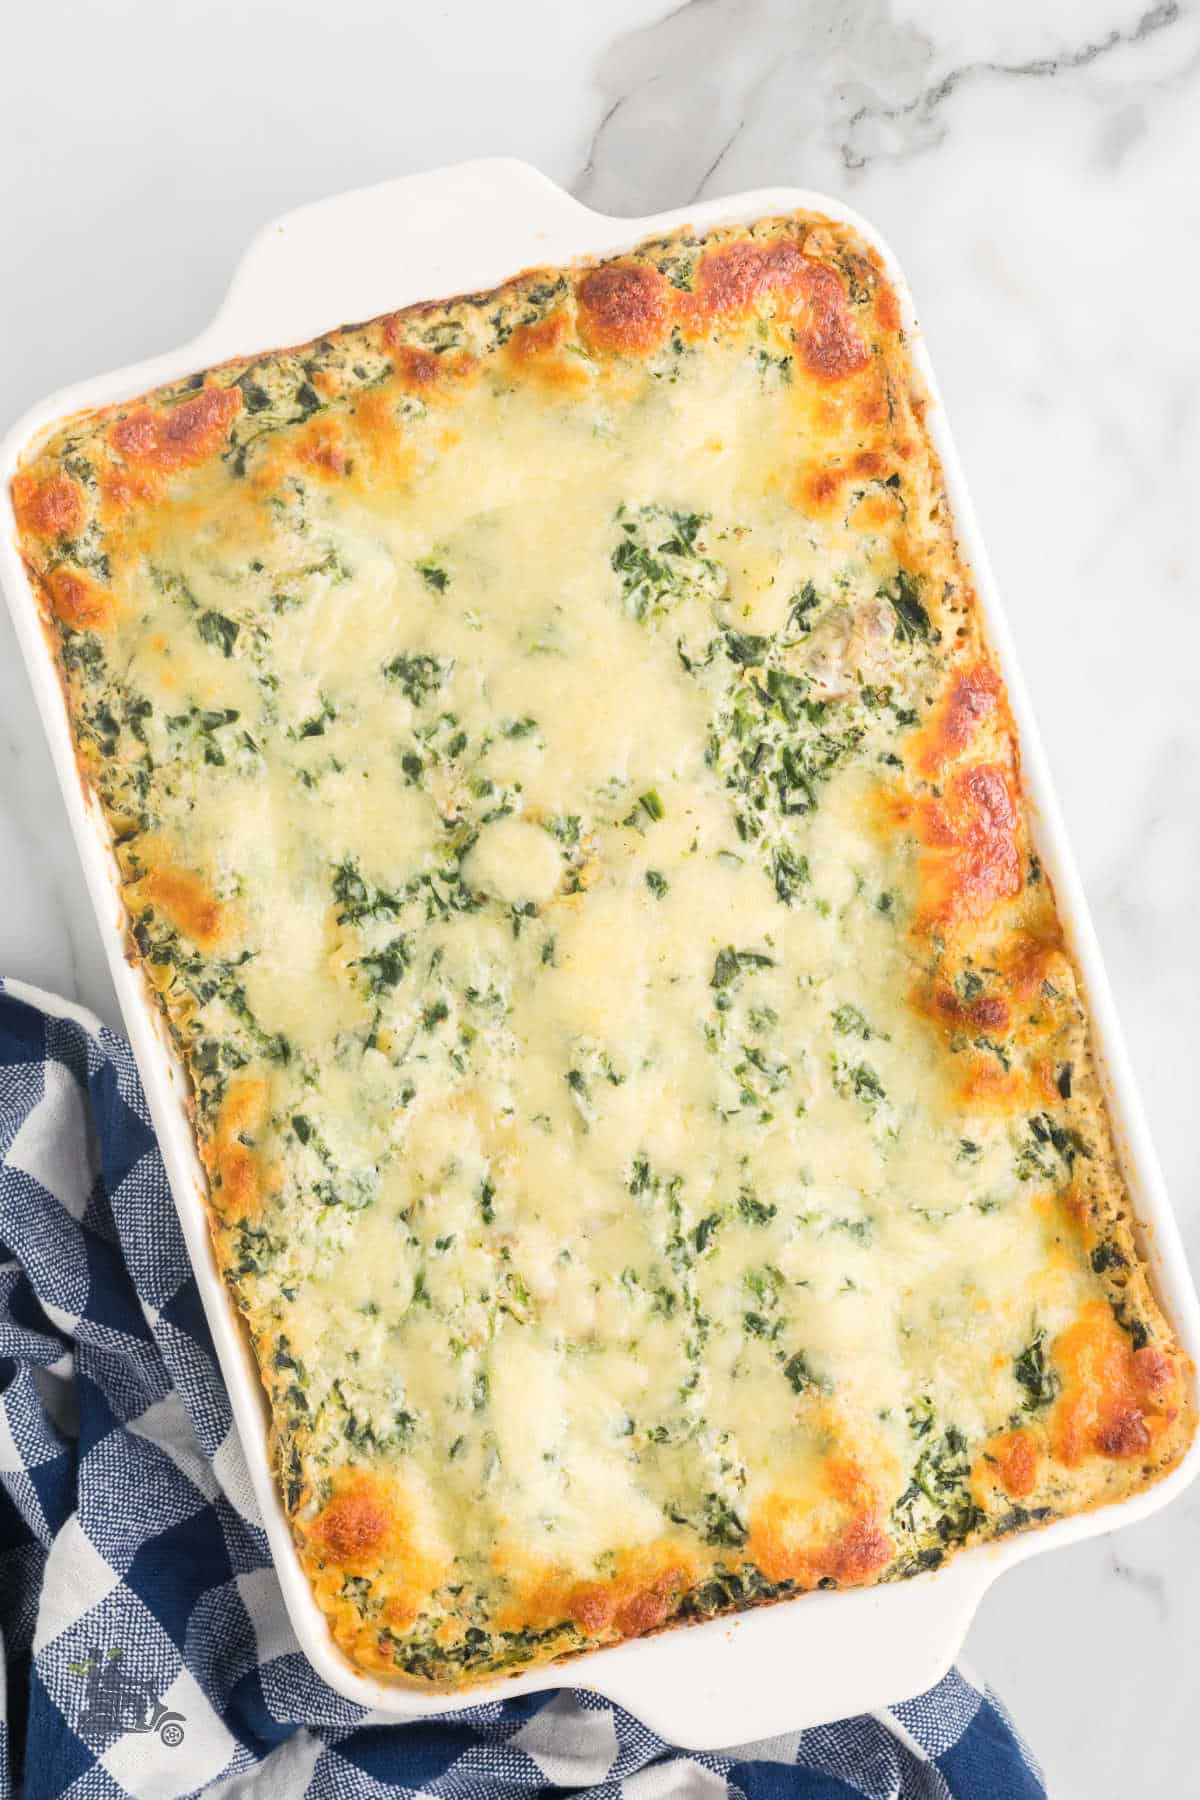 The White Chicken Lasagna with Cheese, Spinach, and Artichokes topped with mozzarella cheese and baked. 